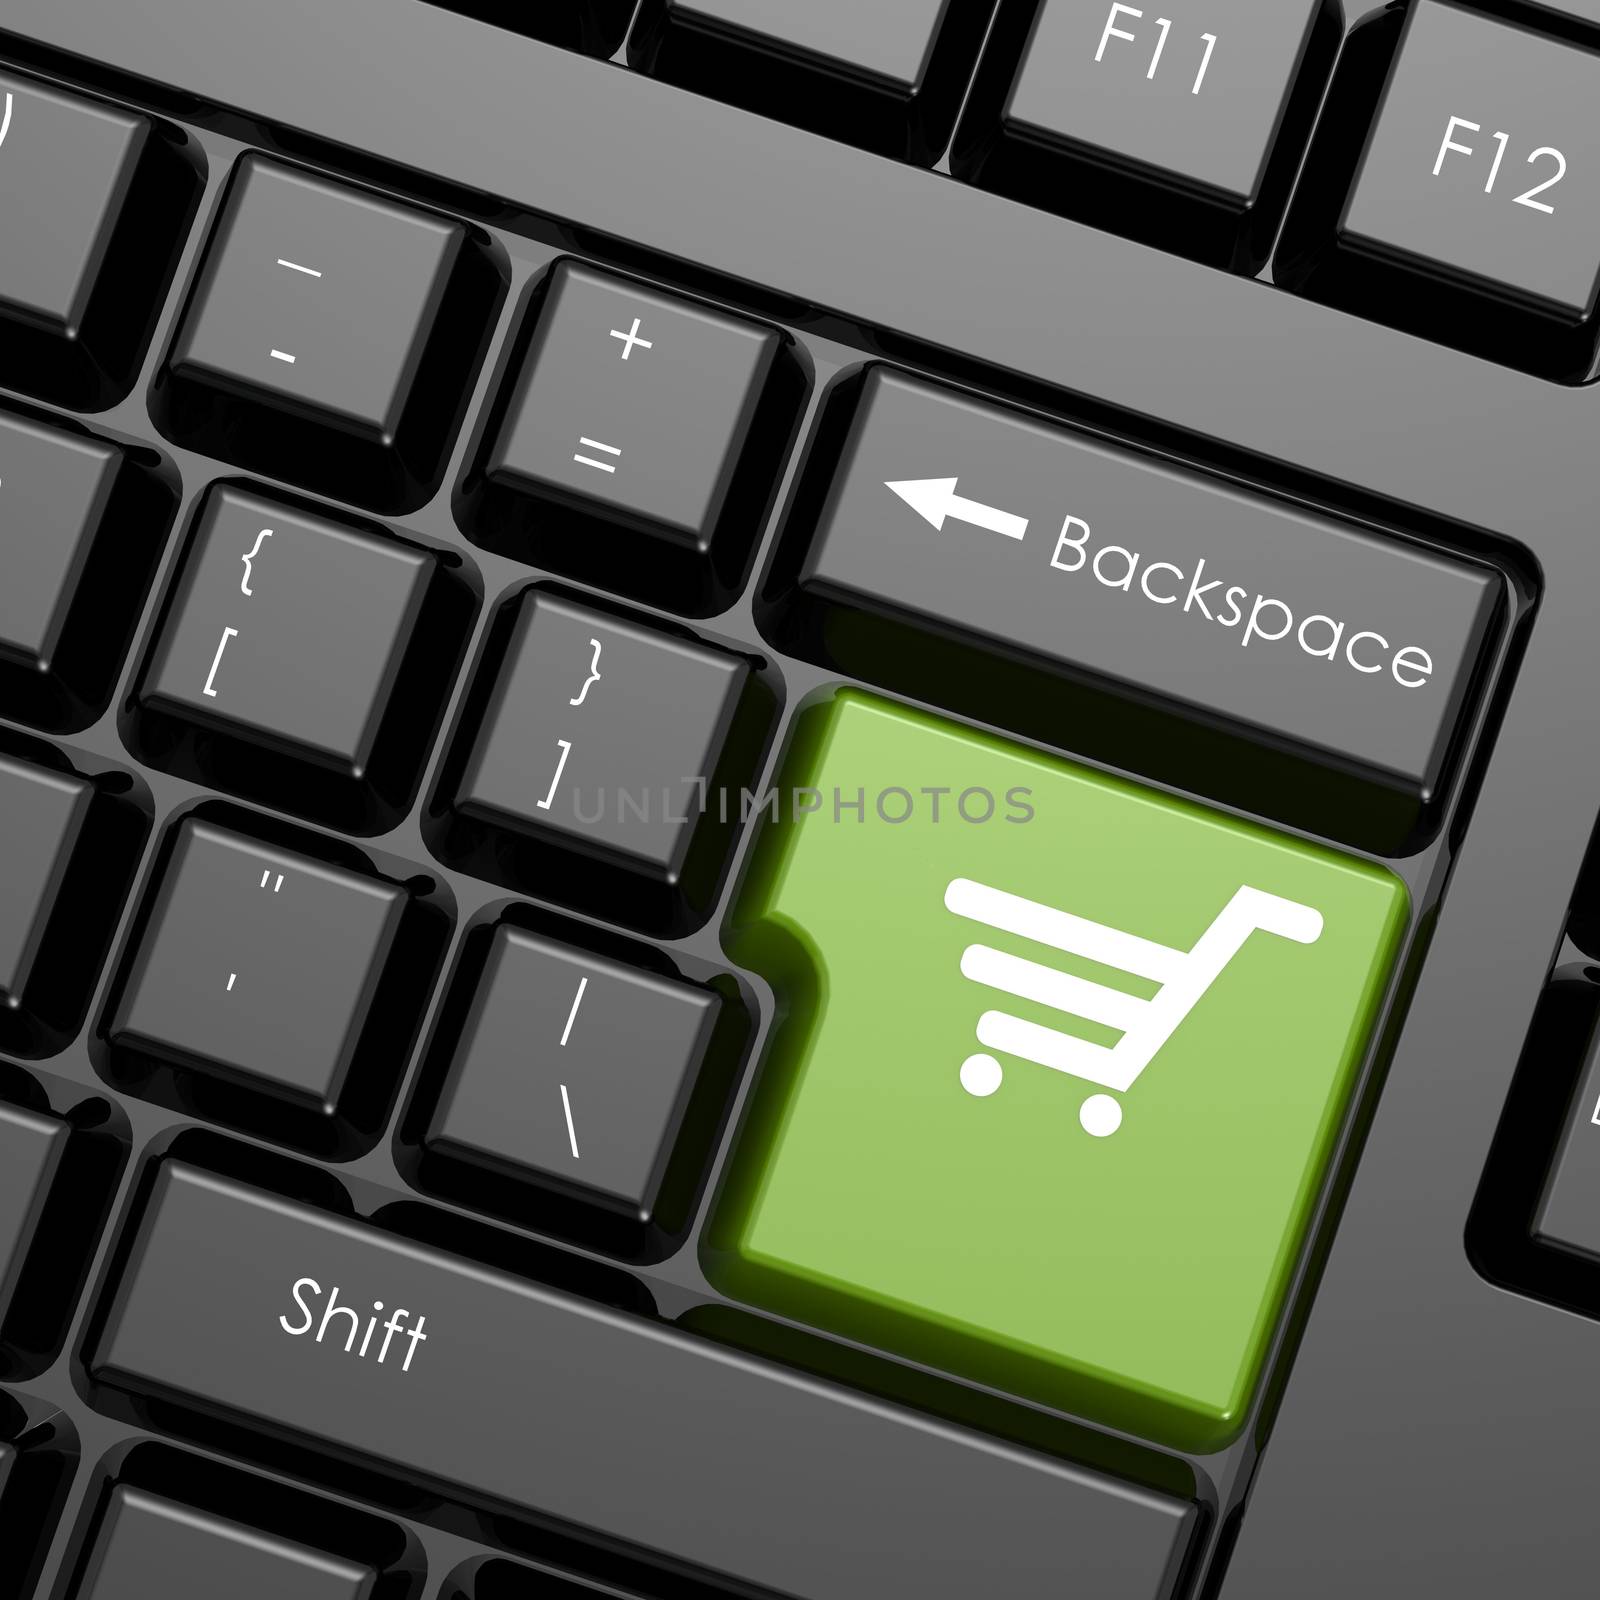 Green enter button with shopping cart on black keyboard, isolated image with hi-res rendered artwork that could be used for any graphic design.